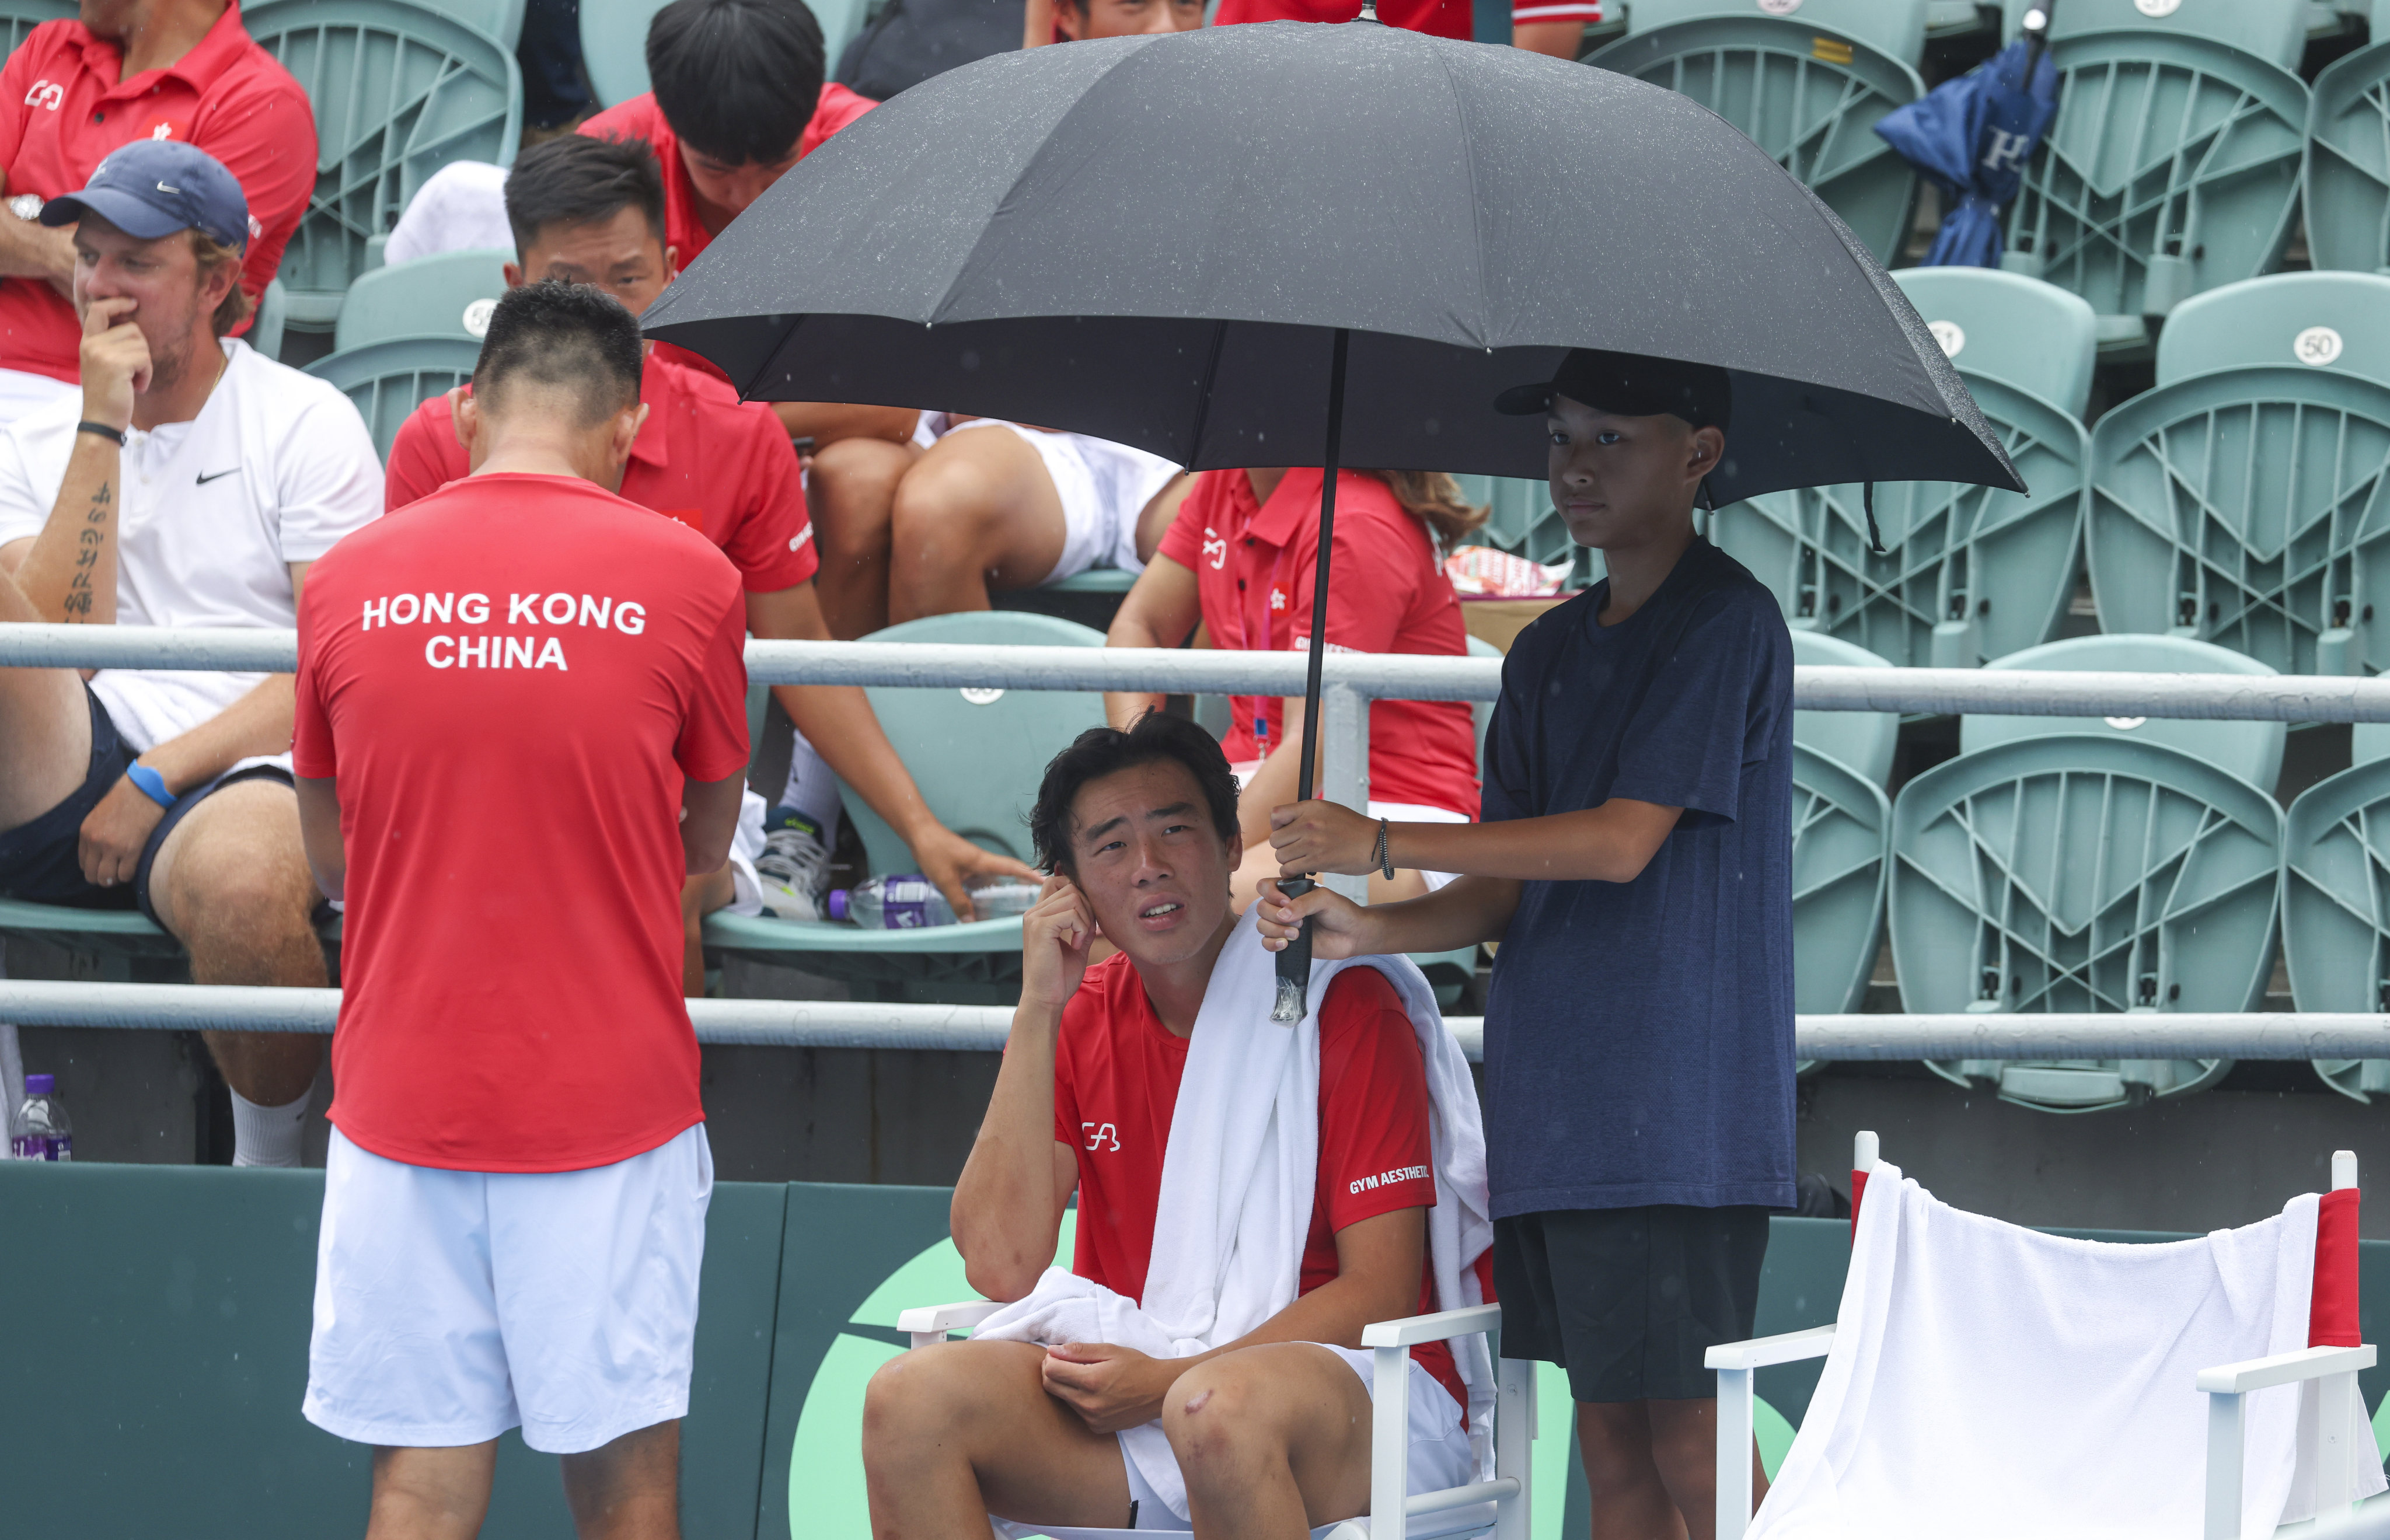 Coleman Wong Chak-lam of Hong Kong takes a break during his Davis Cup match against Martins Rocens at Victoria Park Tennis Stadium, where play is suspended  because of rain in Causeway Bay. Photos: Yik Yeung-man